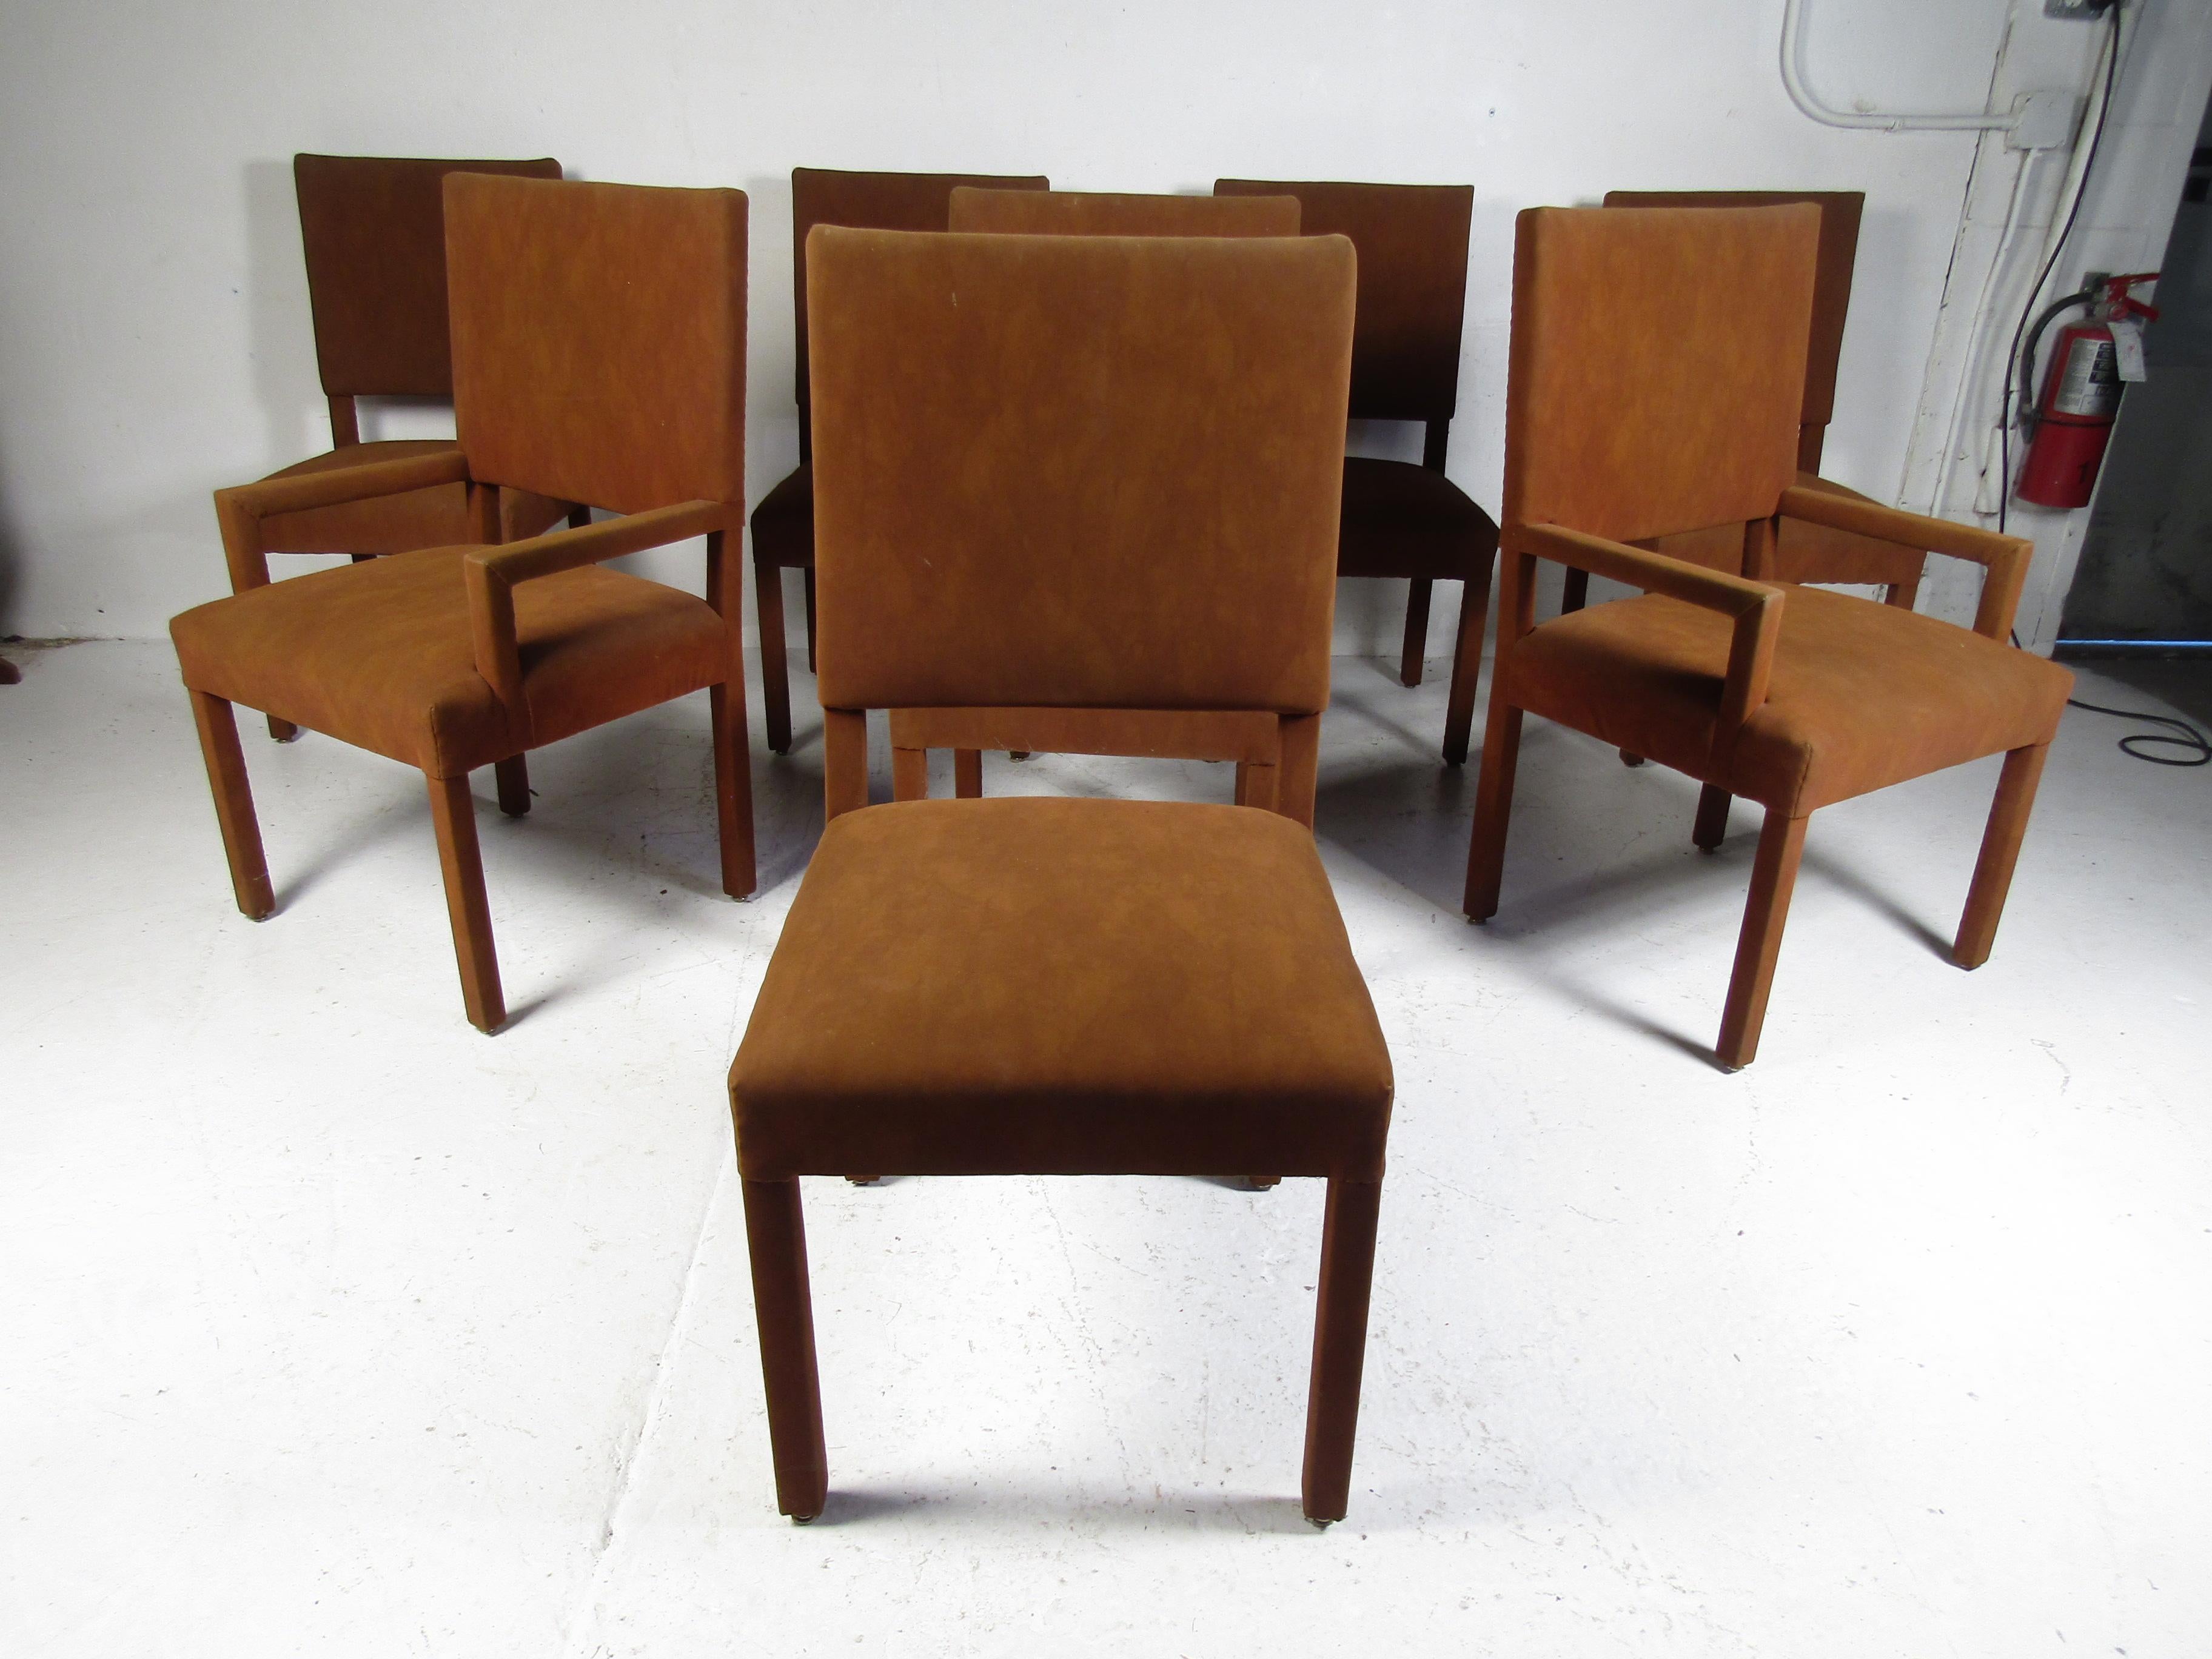 This stunning set of eight vintage modern dining chairs feature suede upholstery and thick padded seating. A sleek and comfortable design that is sure to complement any modern interior. Please confirm item location (NY or NJ).